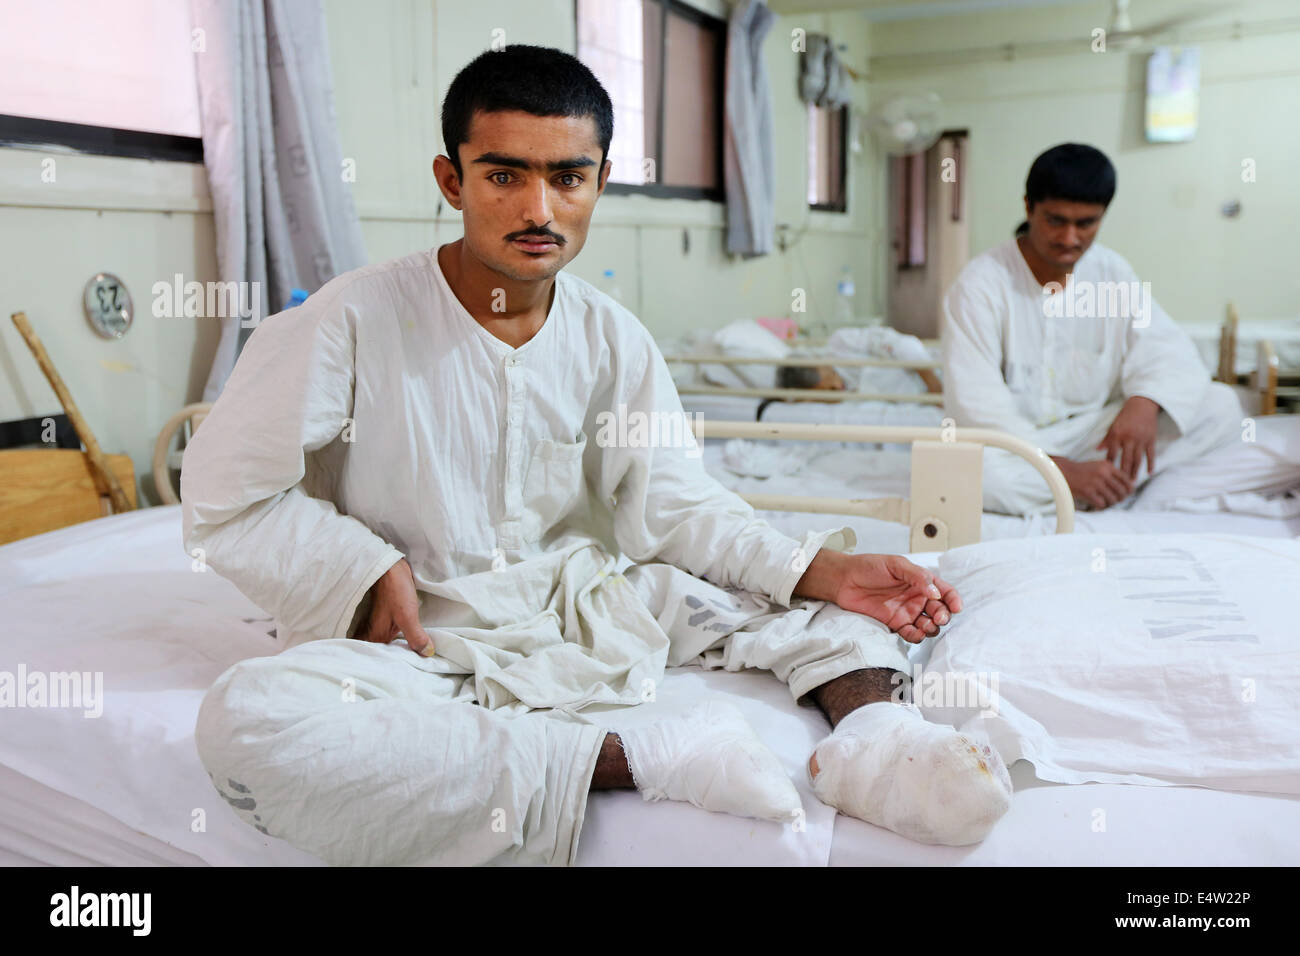 Leprosy patients in the Marie Adelaide Leprosy Centre, Karachi, Pakistan Stock Photo